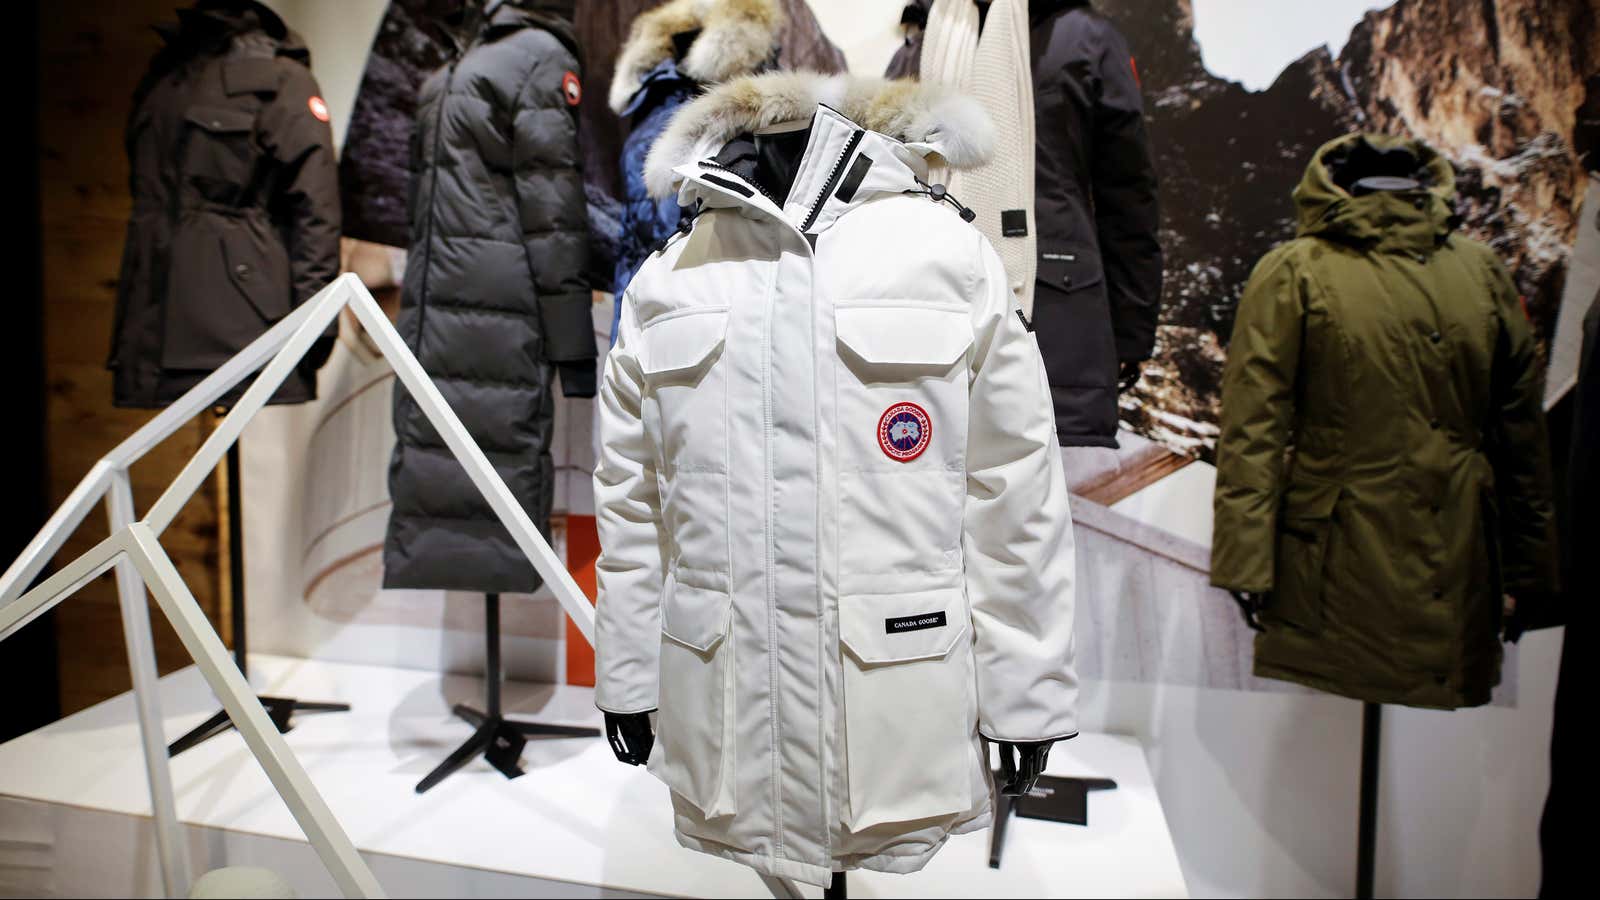 Outerwear makers such as Canada Goose anticipate the rise in outdoor activity due to Covid-19 will fuel demand for their products.